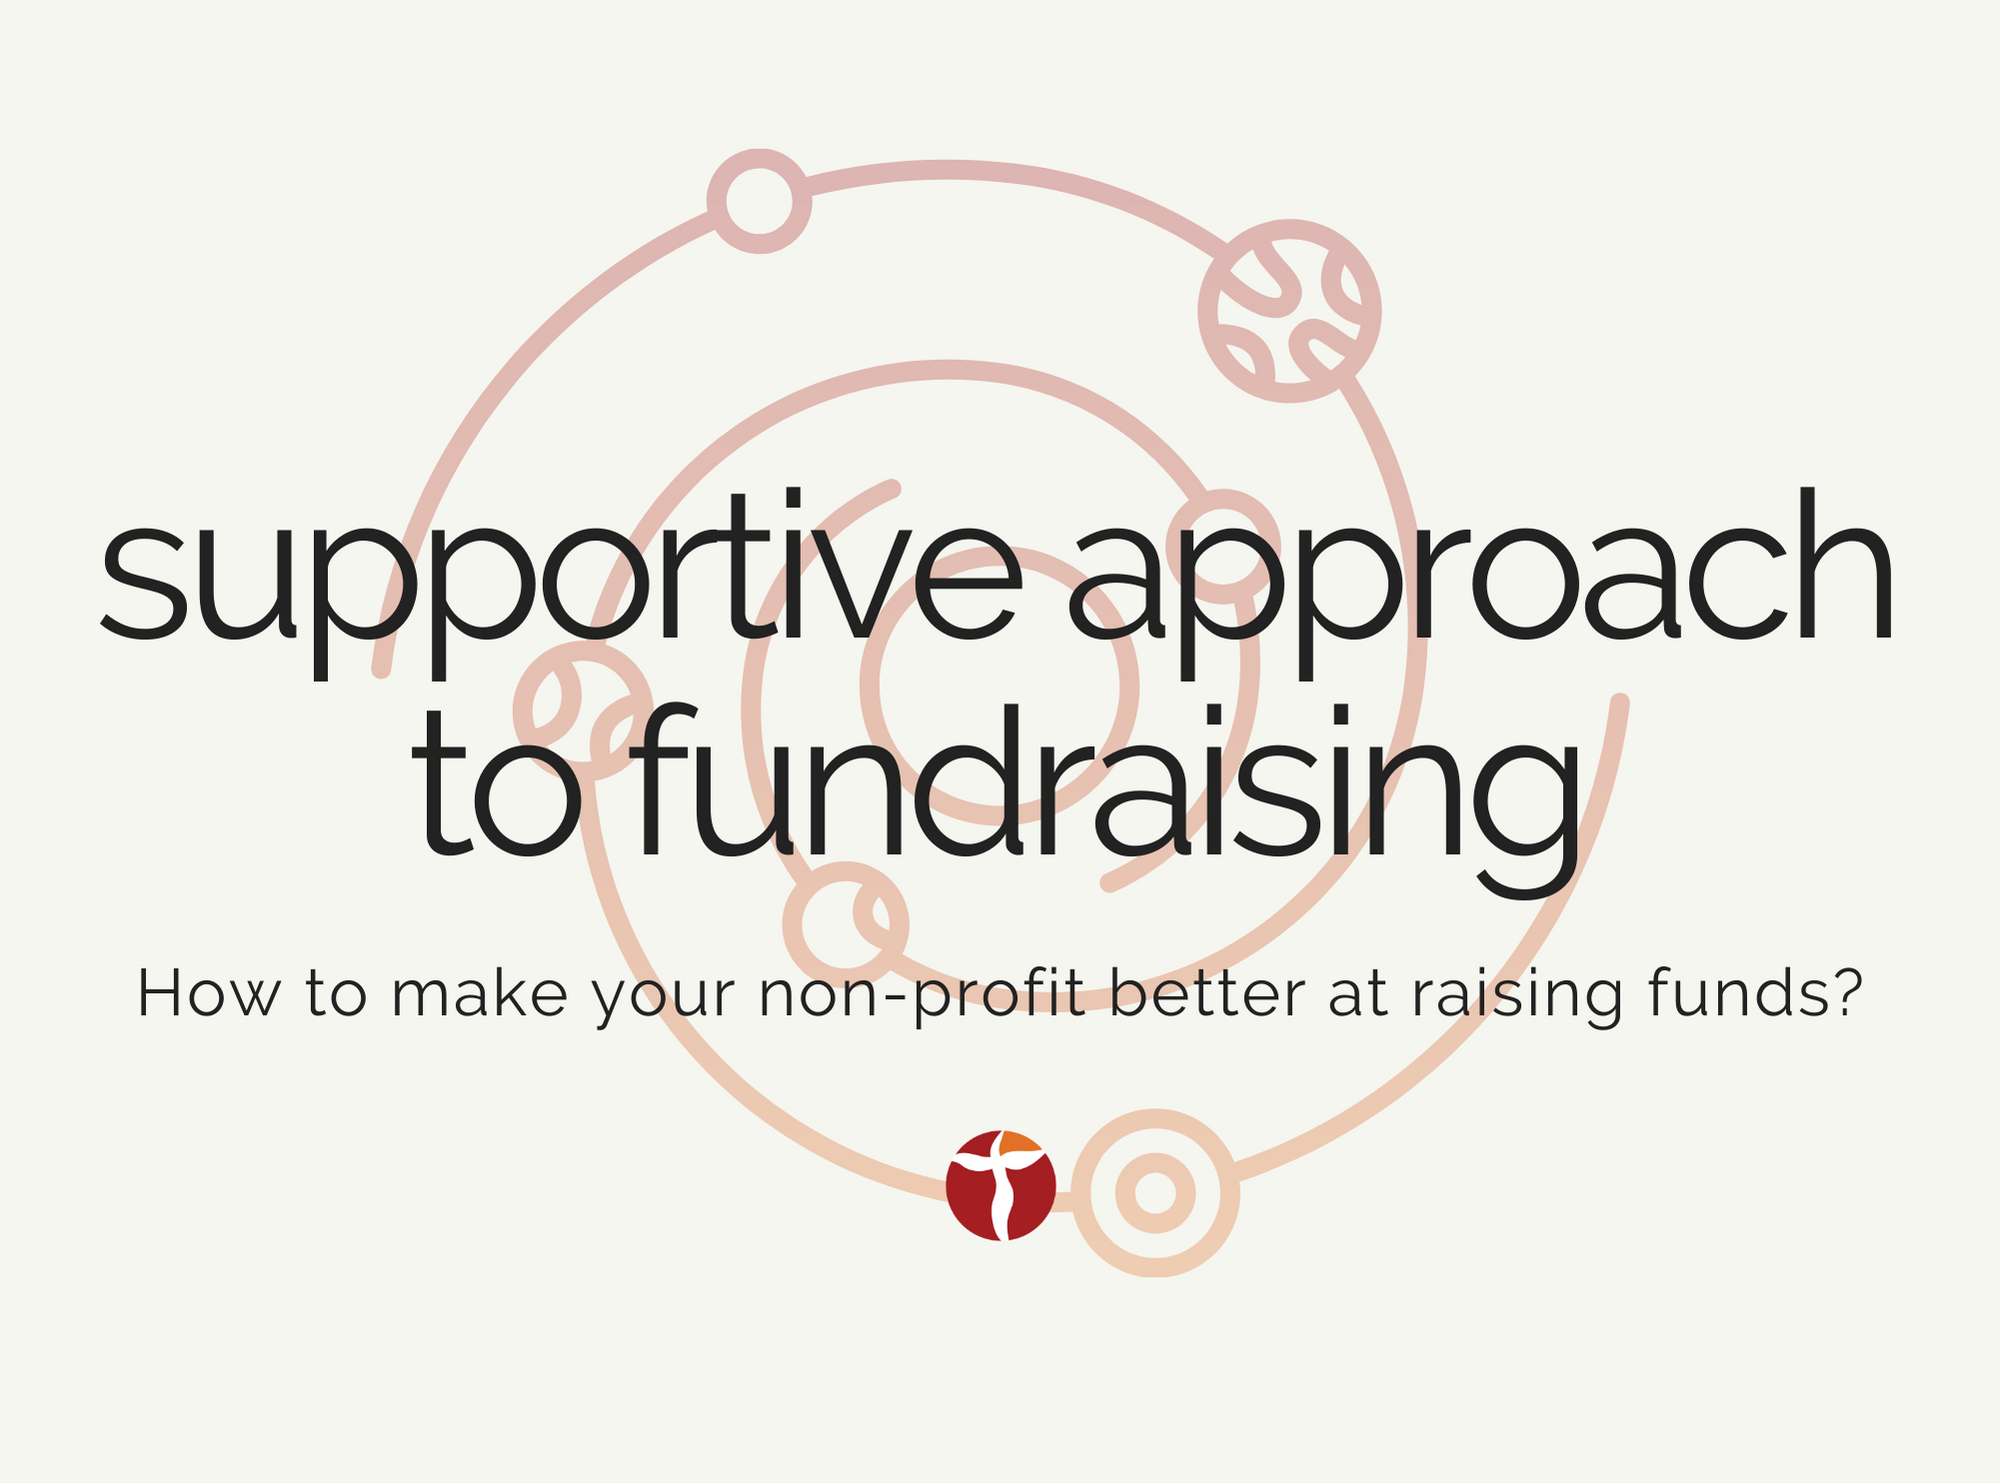 supportive approach to fundraising: how to make your non-profit better at raising funds